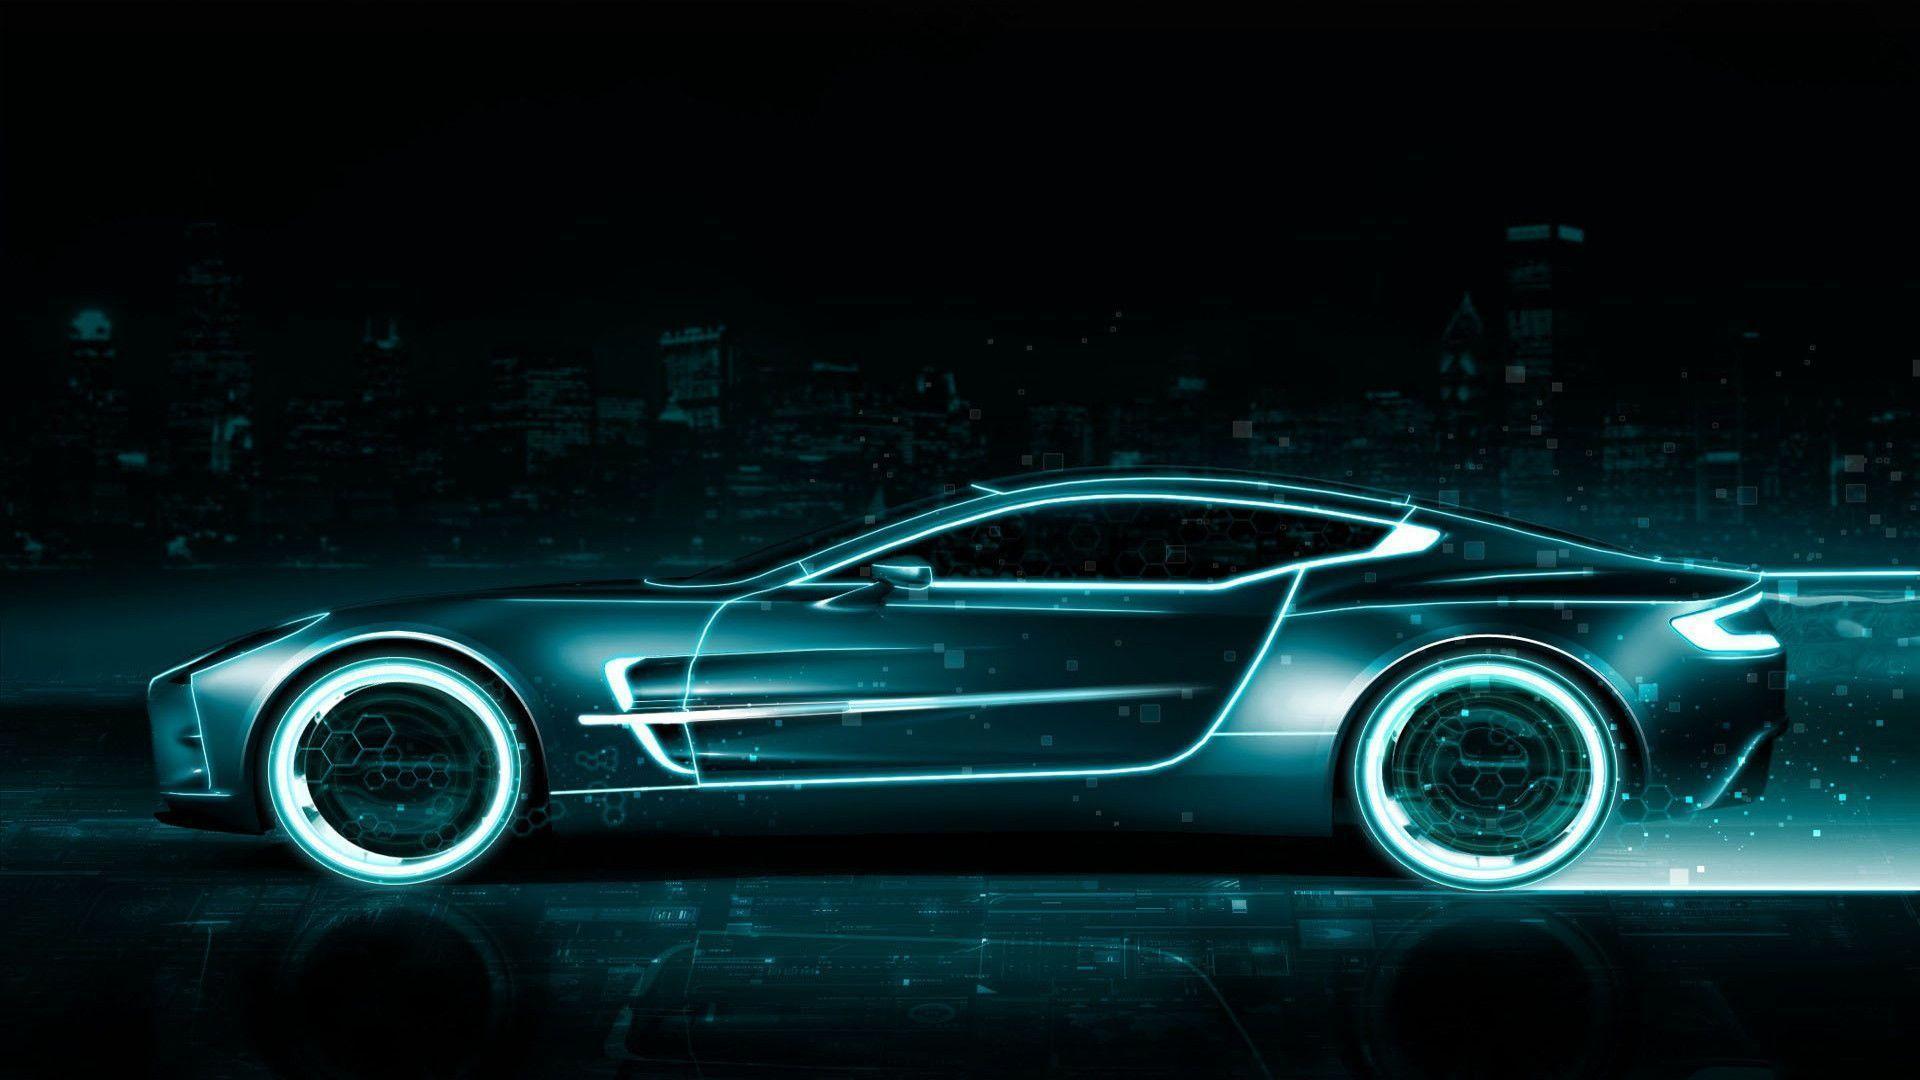 background neon cool cars wallpaper Neon car purple cars cool
wallpapers wallpaper backgrounds hd wallpaperaccess fresh cave